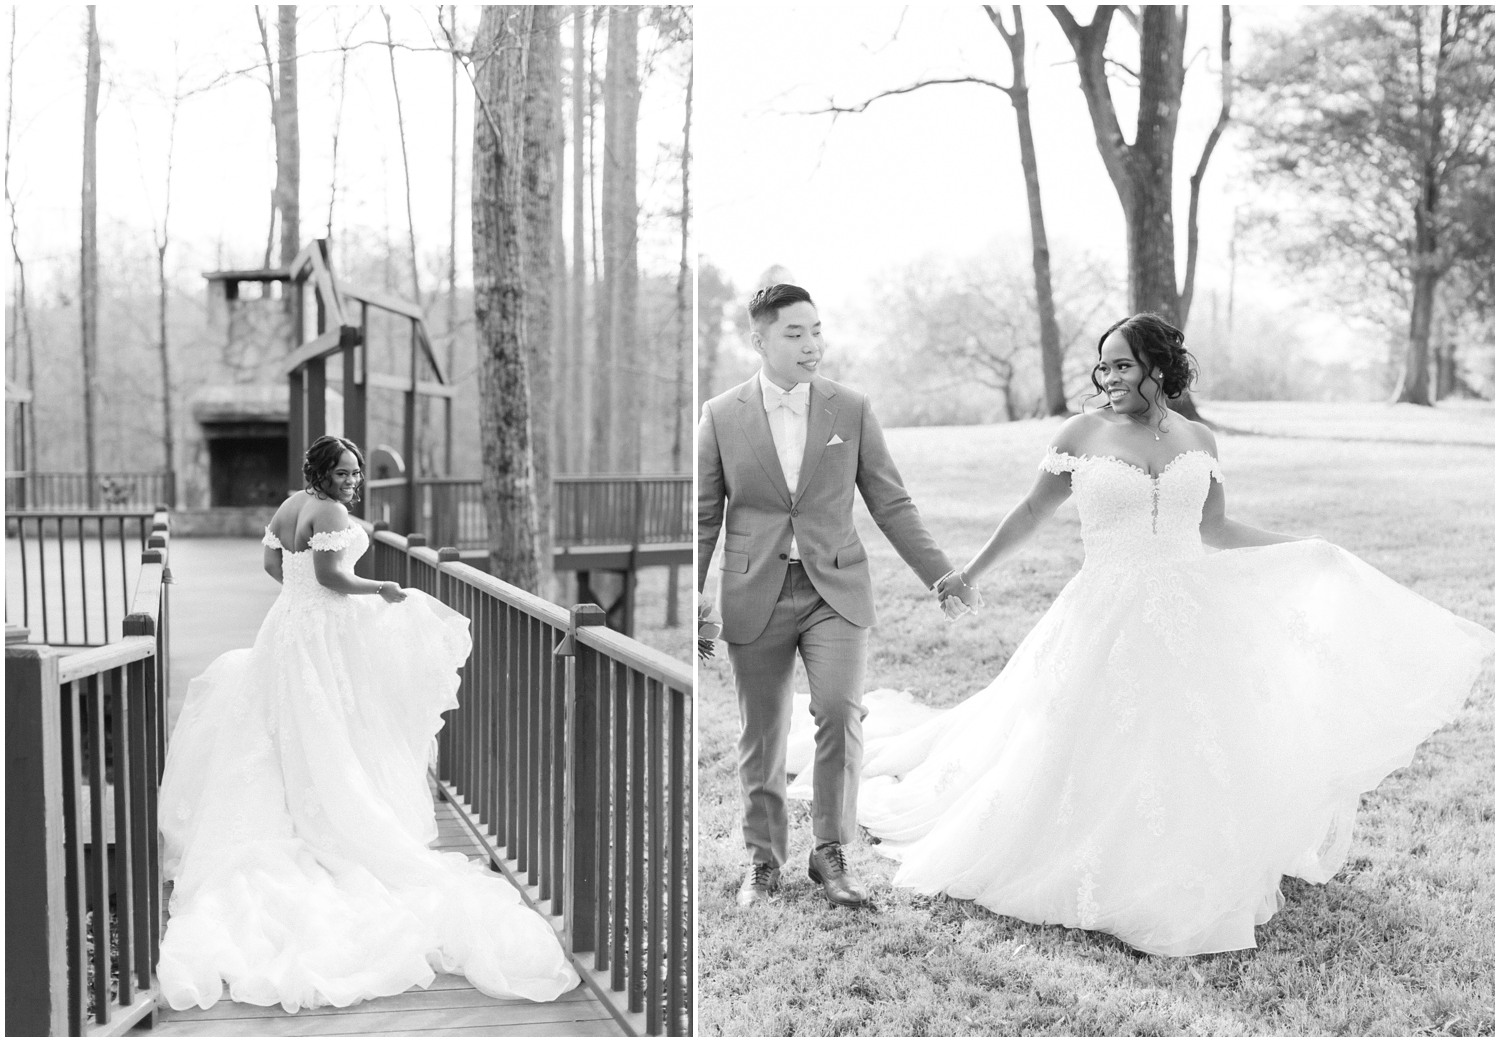 Candid moments of bride and groom enjoying their wedding day at The Barn at Valhalla in Raleigh, NC